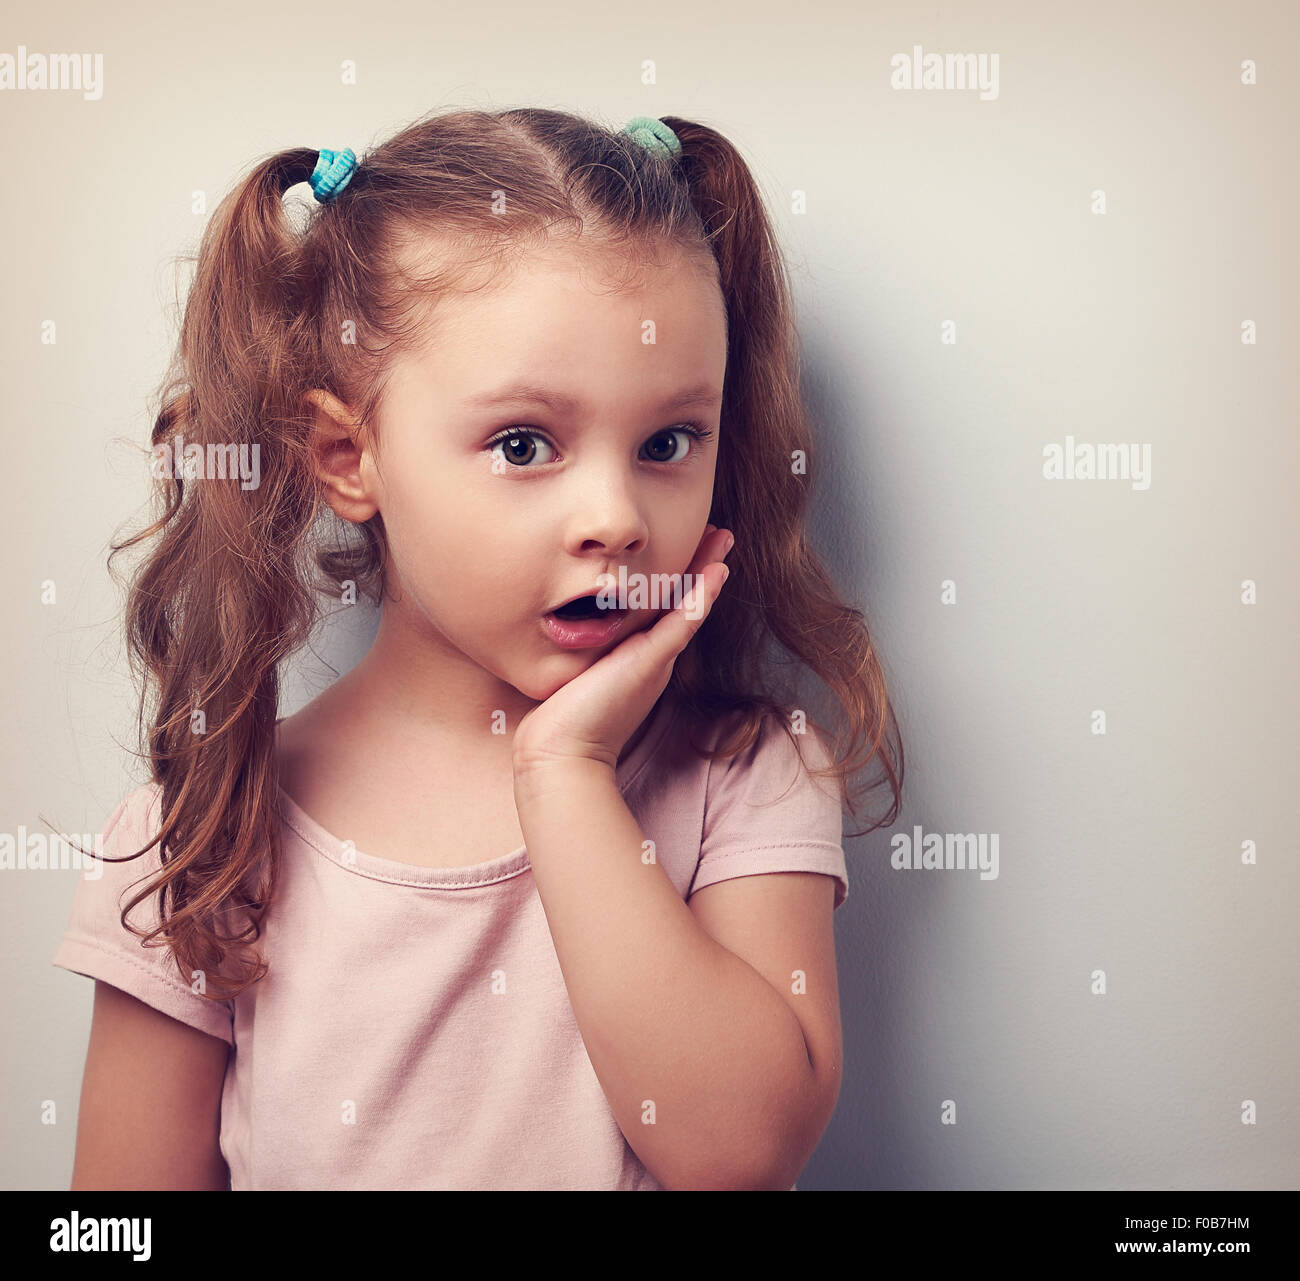 Surprising cute kid girl with open mouth looking serious. Vintage portrait Stock Photo